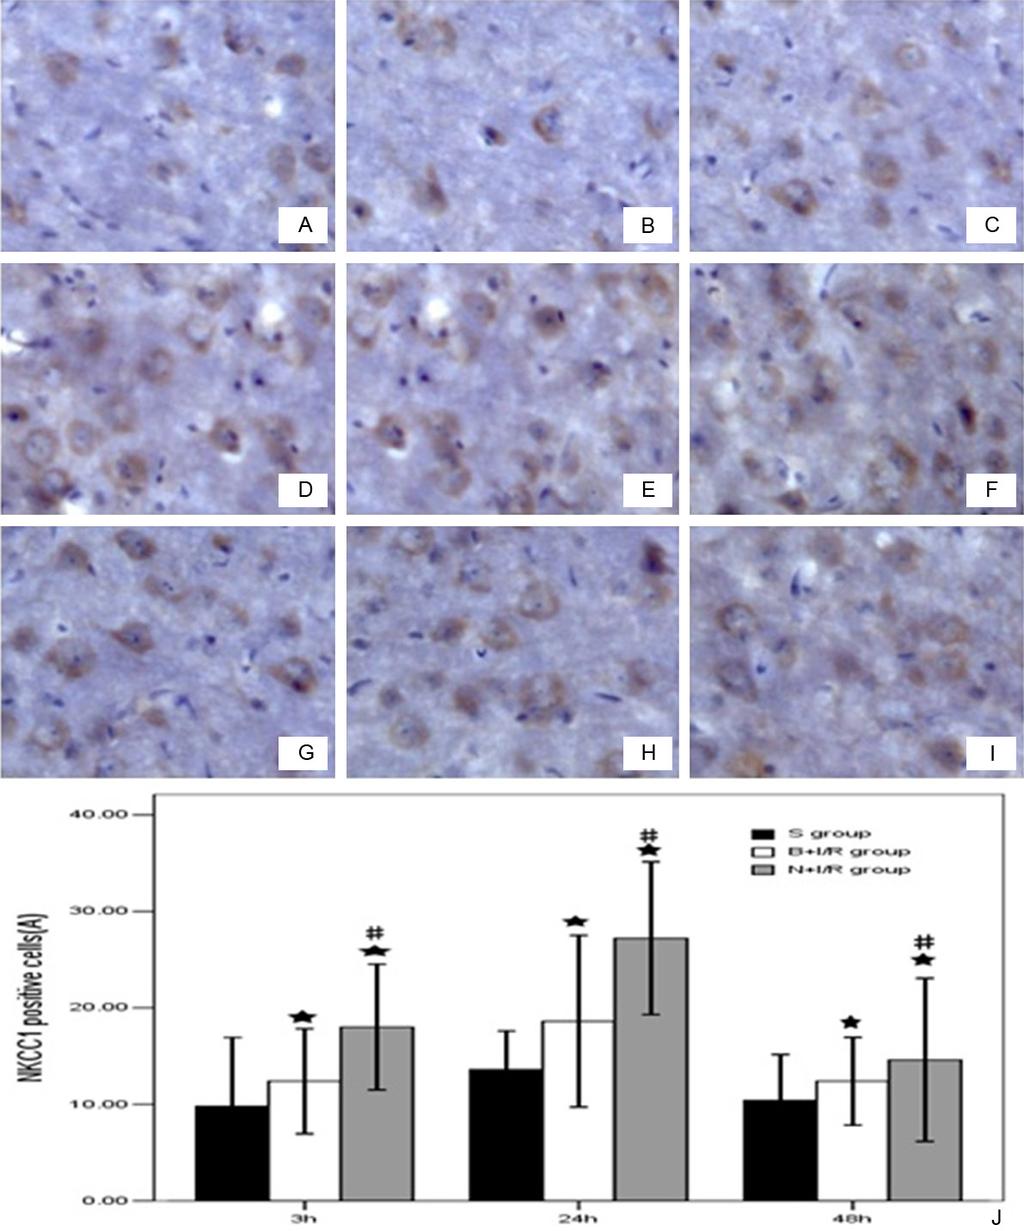 Figure 4. Bumetanide down-regulates the NKCC1 protein expression level in rat brain cortex. A-C. Respectively were sham group rats at 3h, 24h, 48h. D-F were saline group, G-I were bumetanide groups.